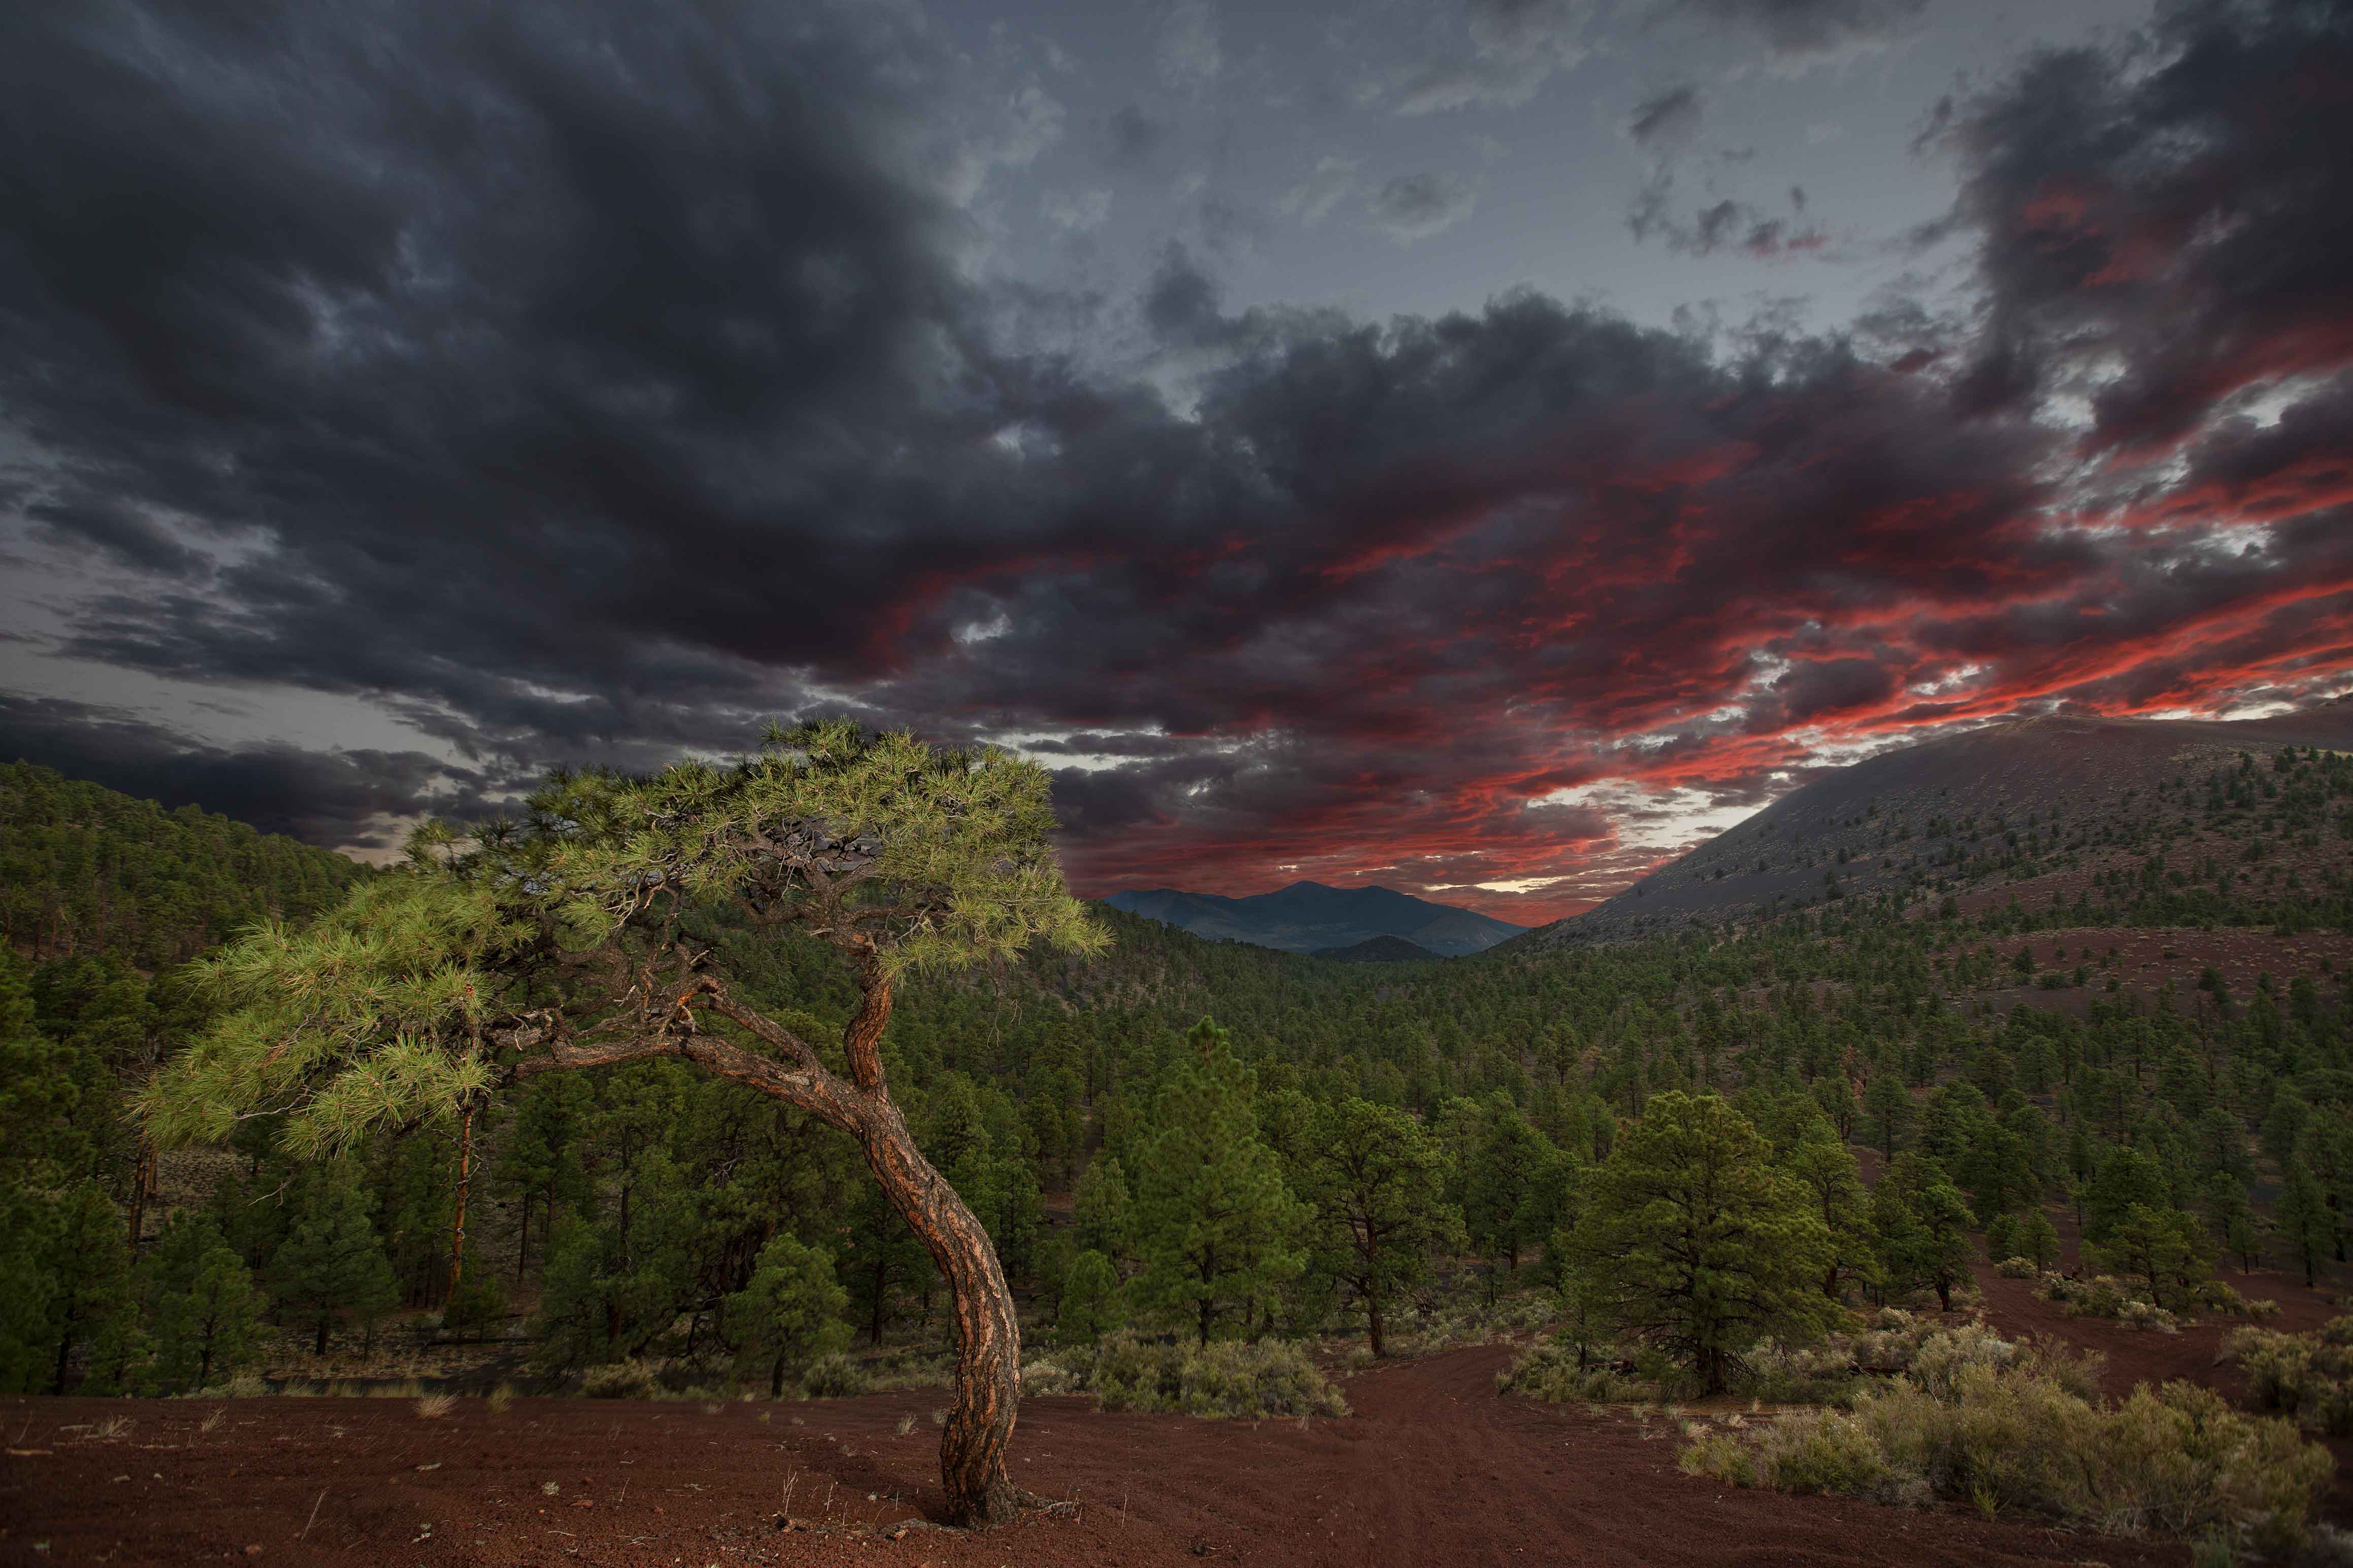 A Ponderosa pine forest in the Cinder Hills of northern Arizona. At right is Sunset Crater and in the distance are the San Francisco Peaks.